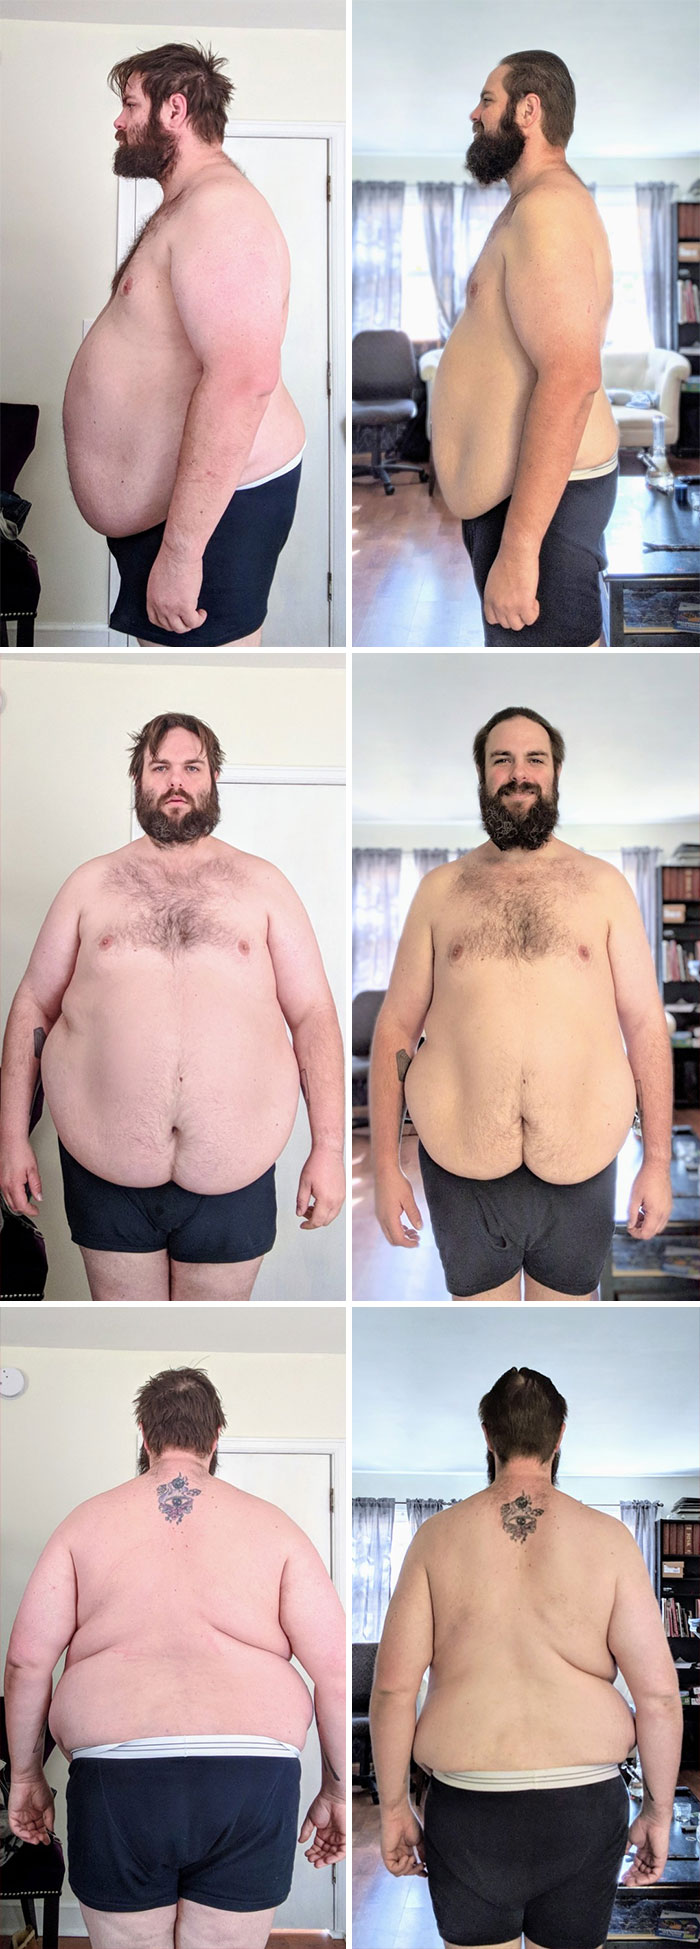 101 Lbs Down In 8 Months Doing Keto